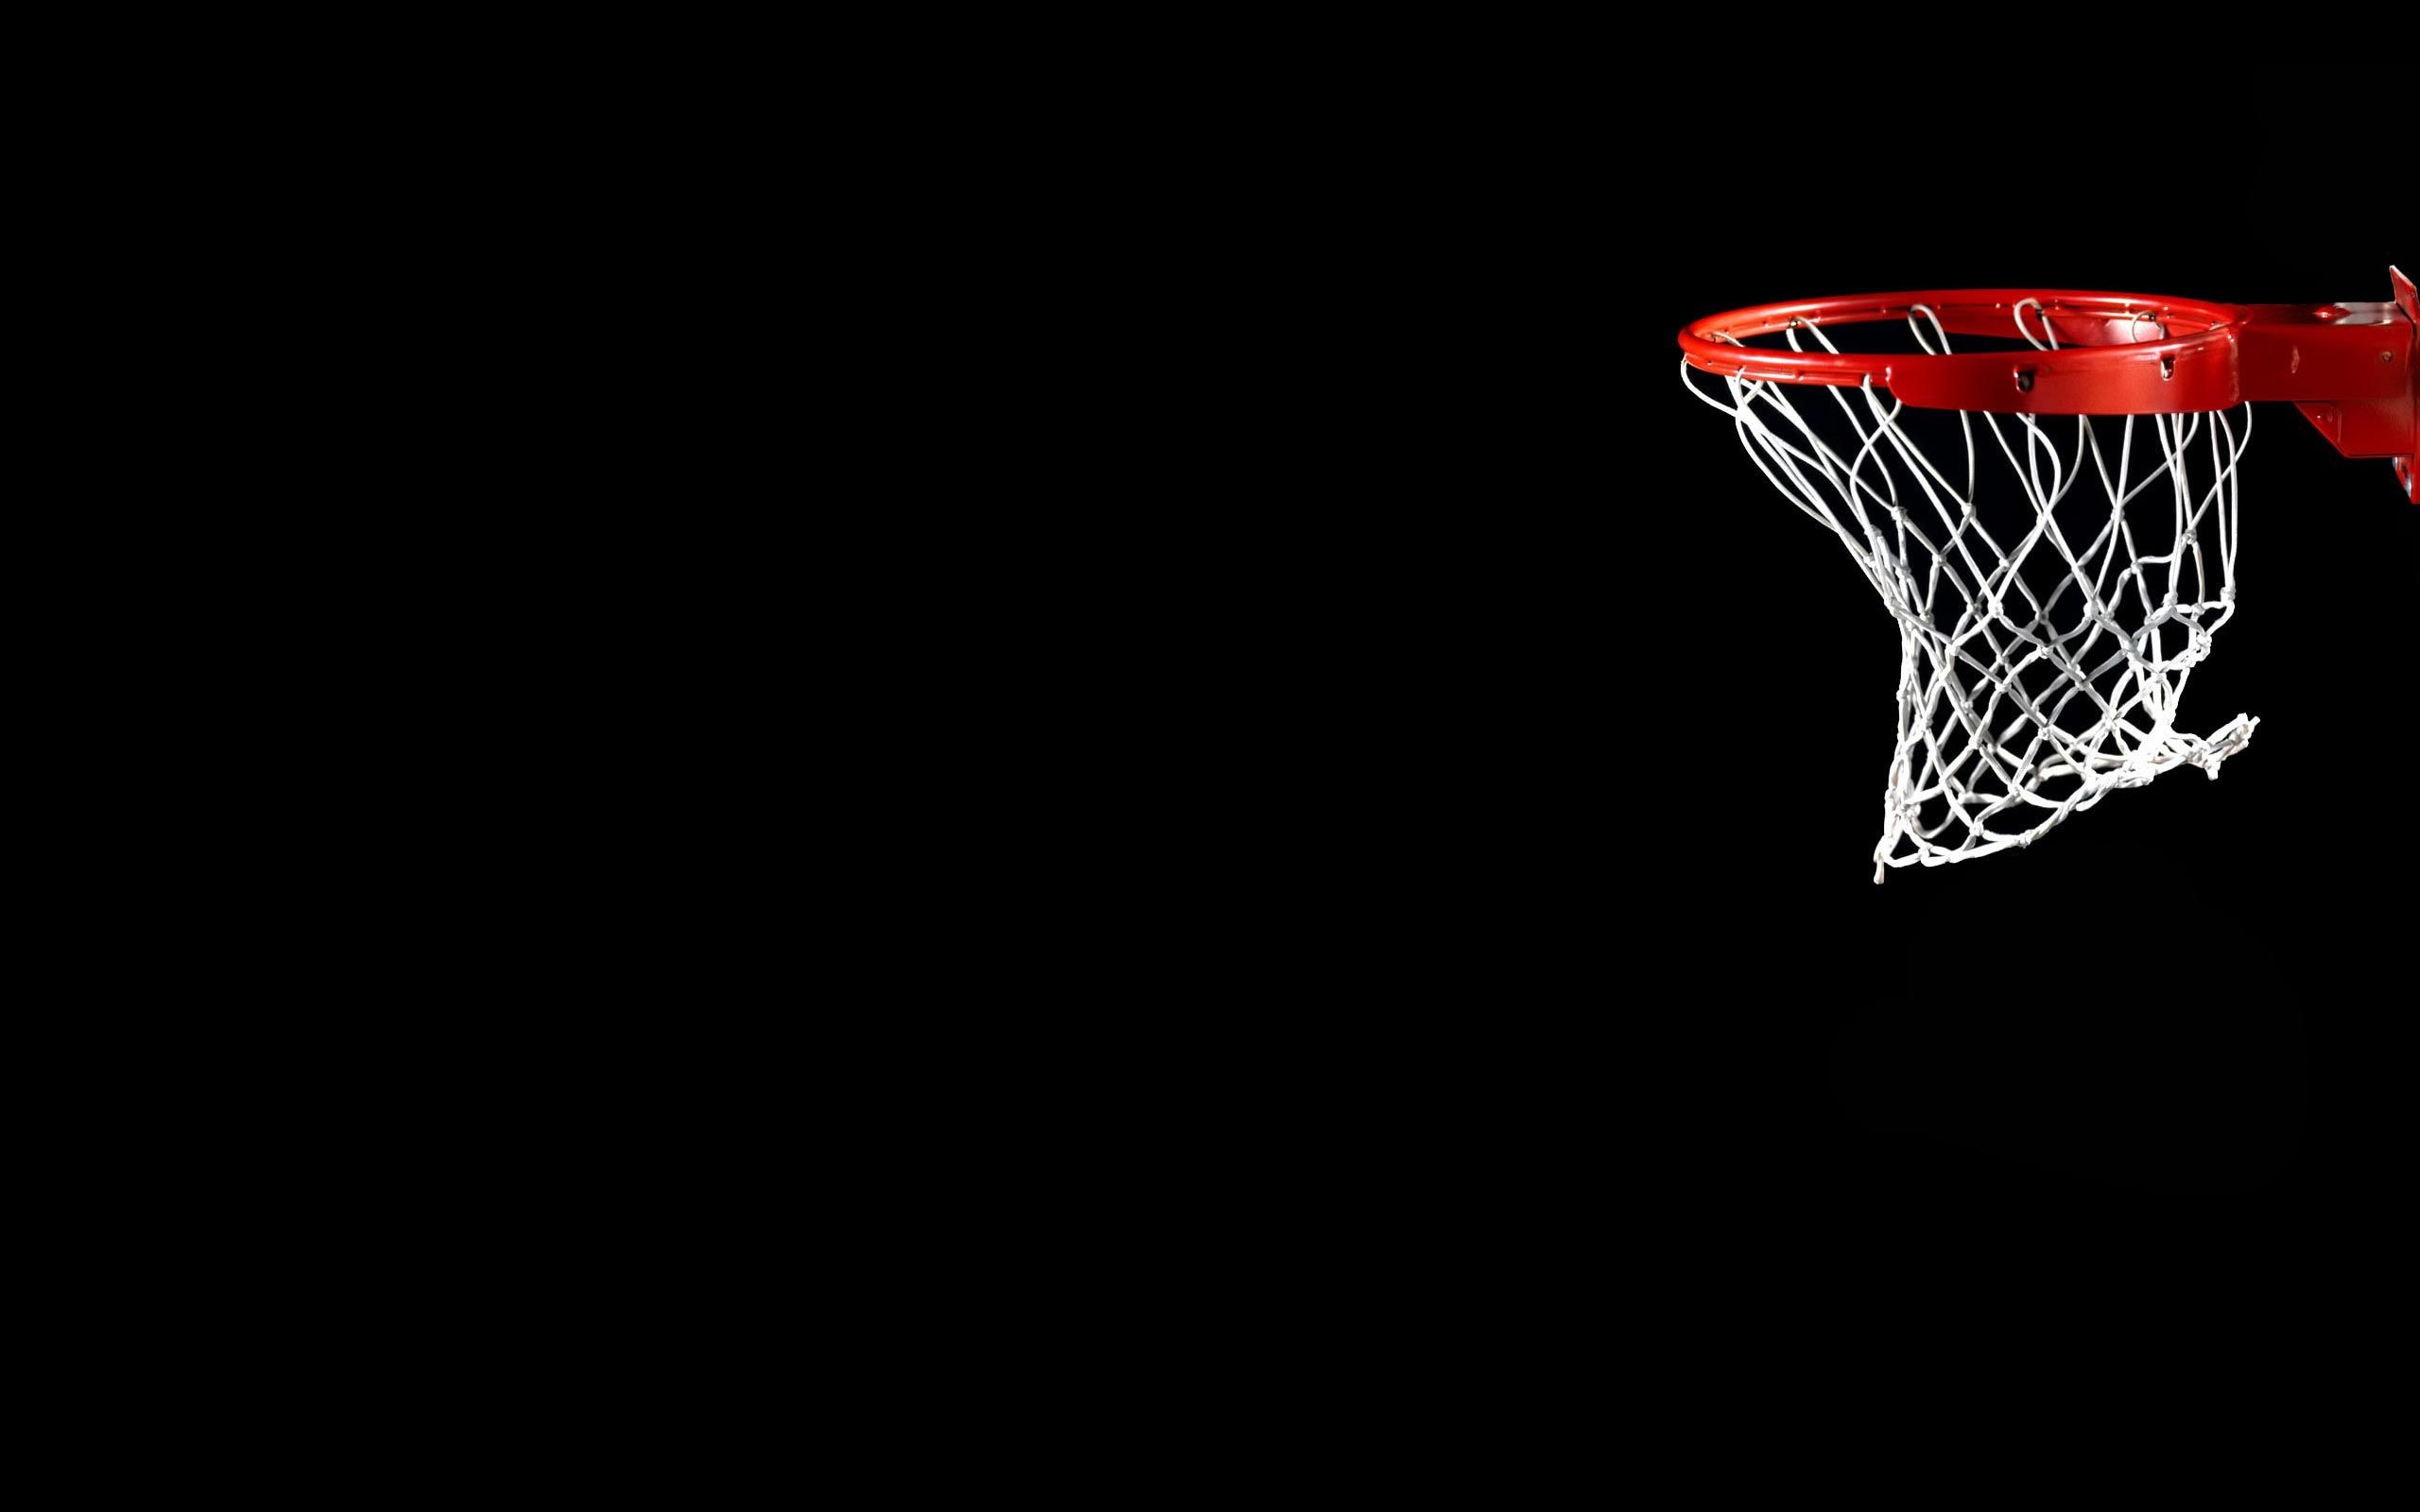 Nike Basketball Wallpaper Picture For Desktop Wallpaper 2560 x 1600 px 1.2  MB just do it